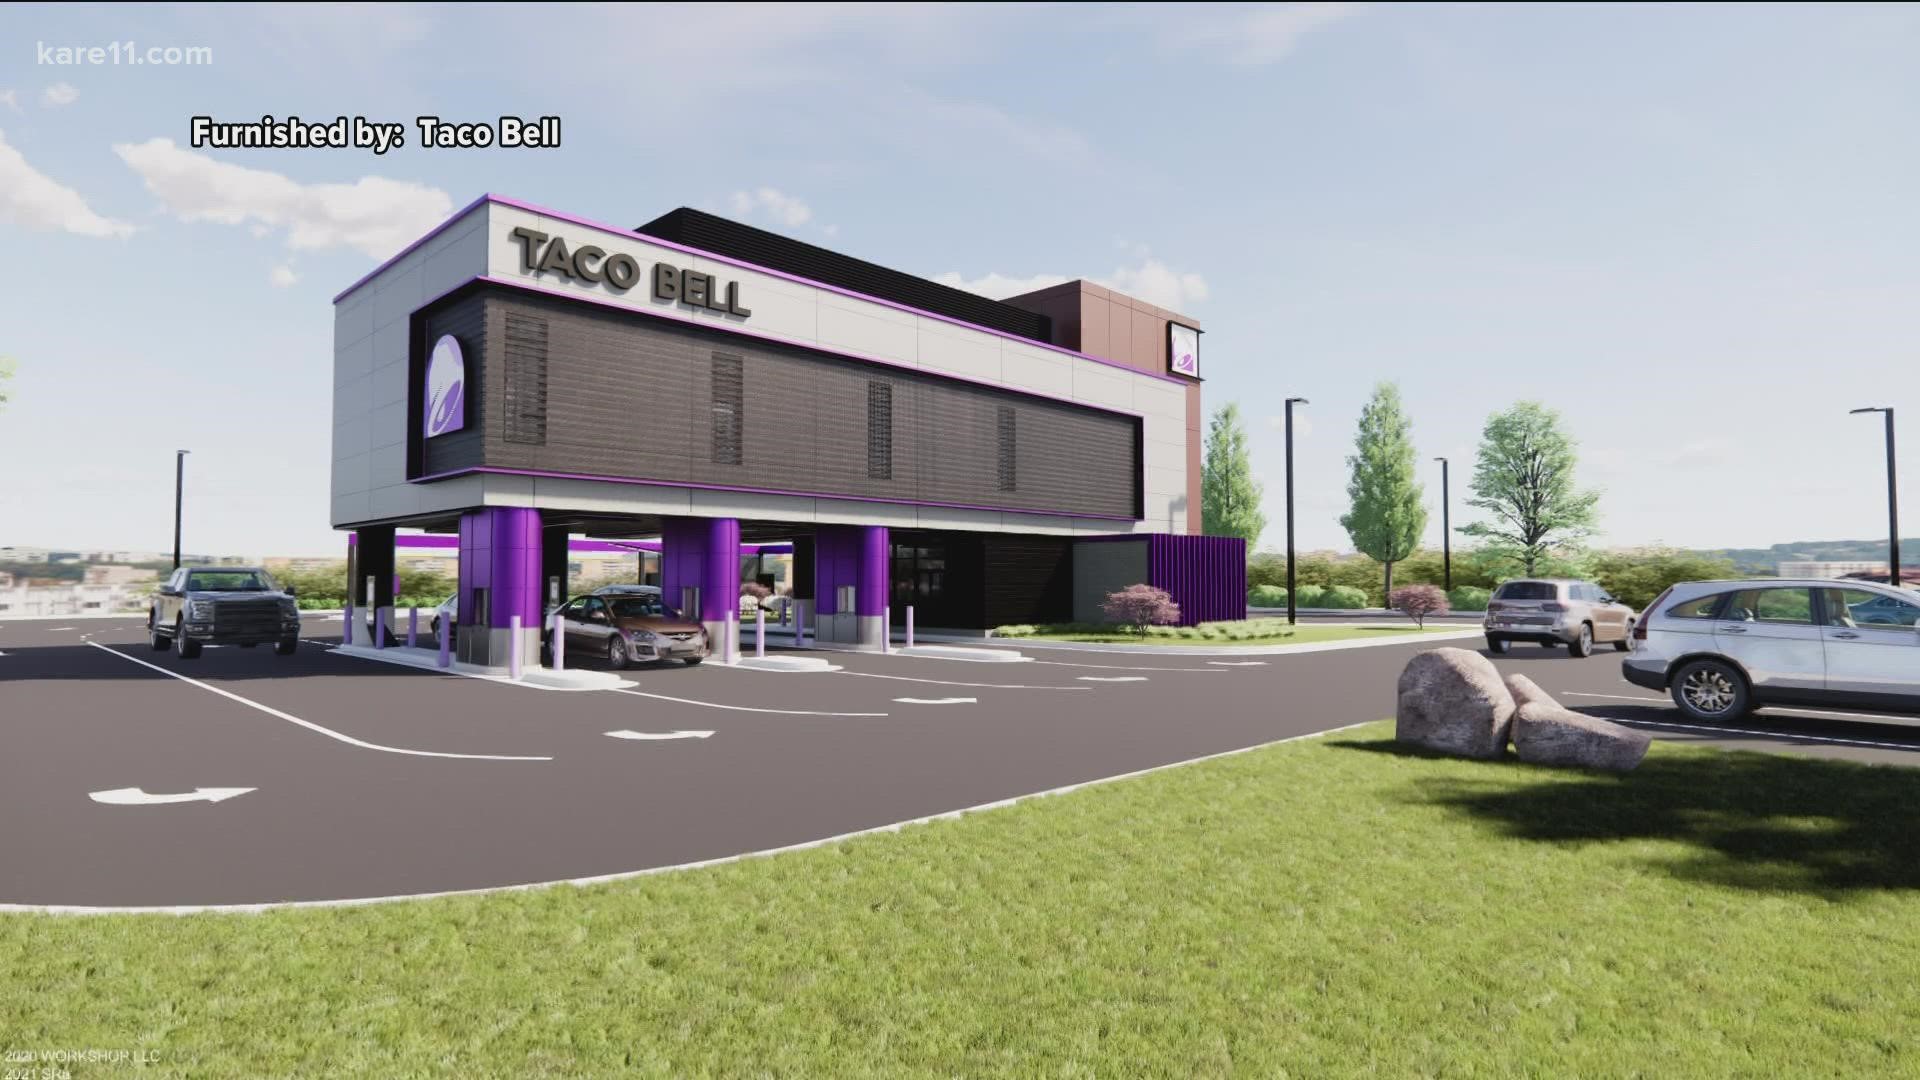 Taco Bell Defy will provide customers a quicker way to order, receive food. It's expected to open in Brooklyn Park in April of 2022.